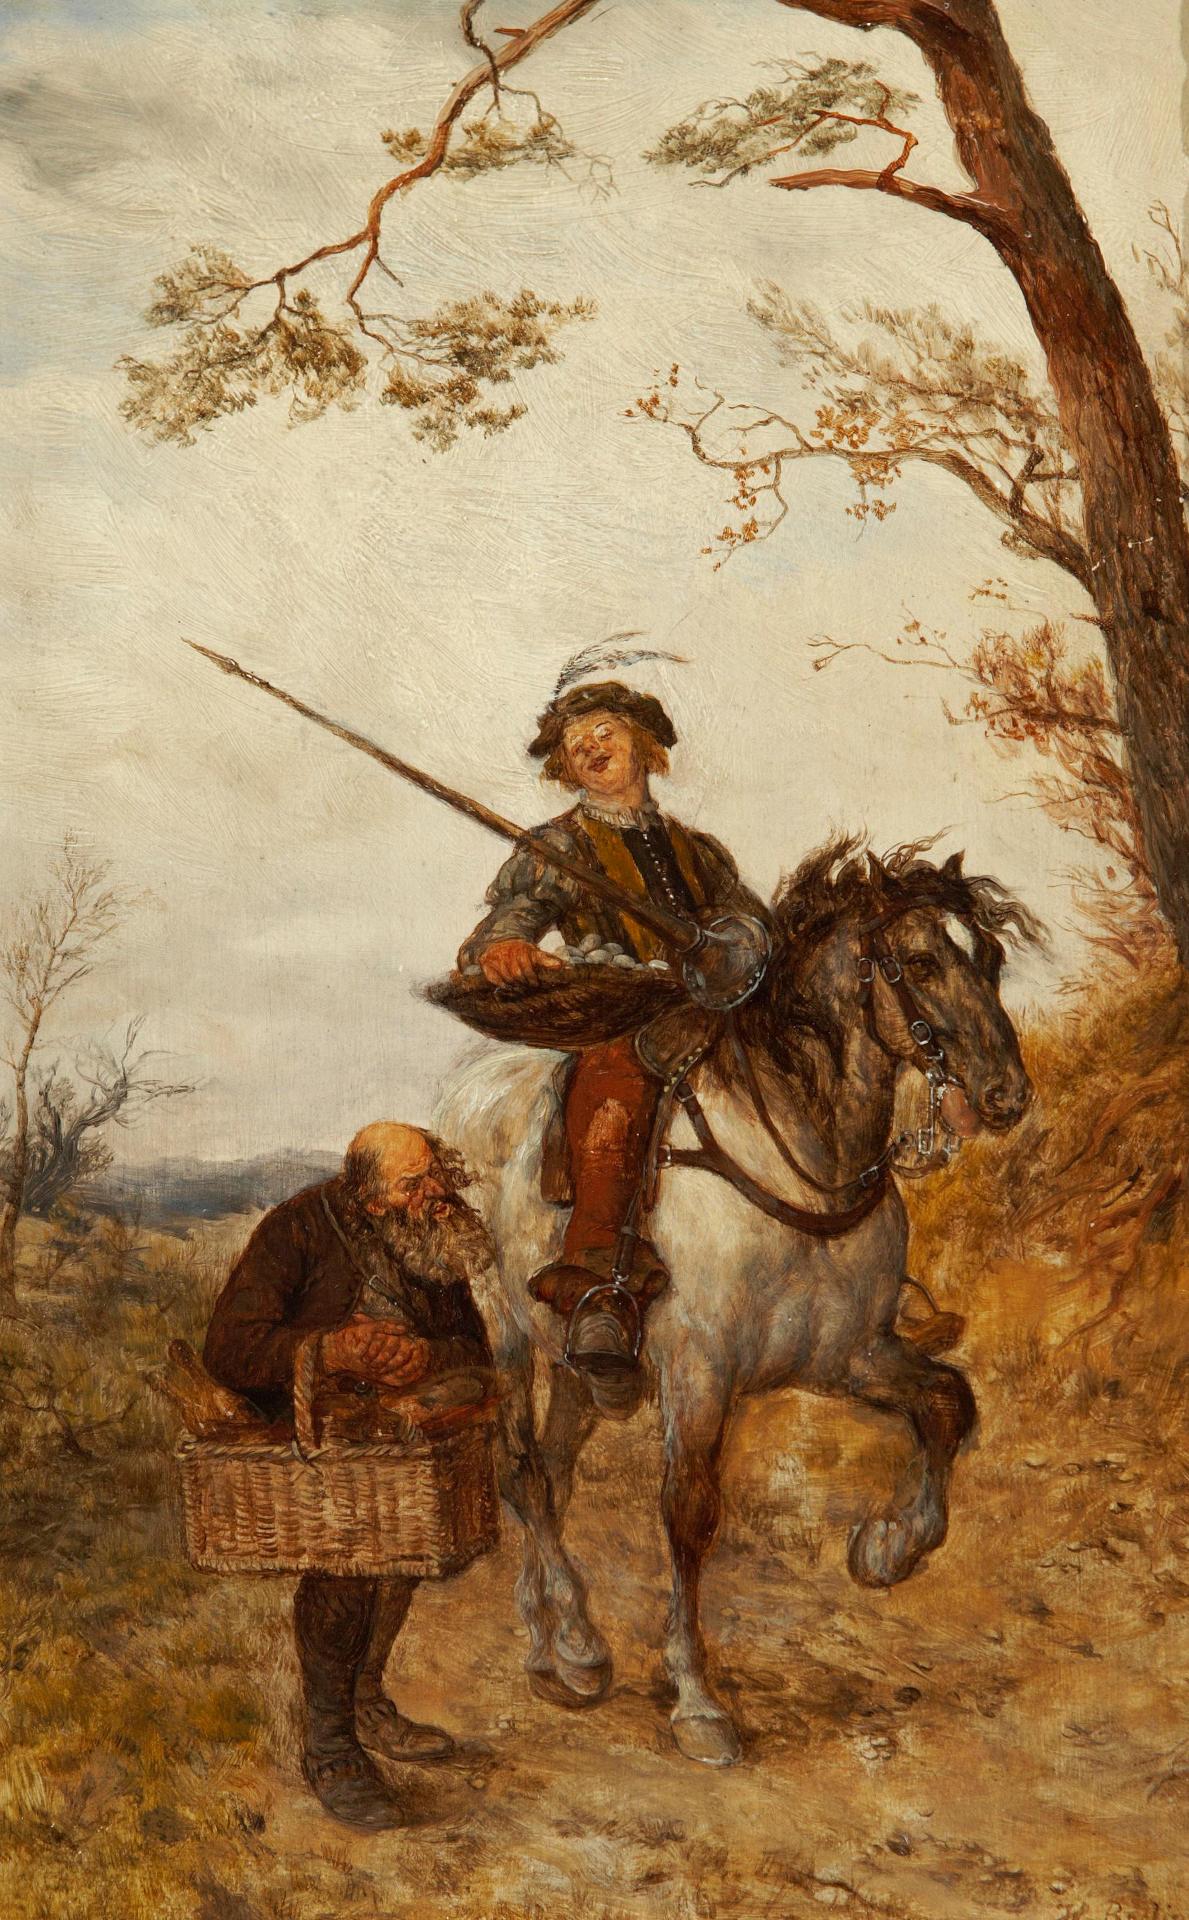 Heinrich Breling (1849-1914) - A Knight taking provisions from an old peasant